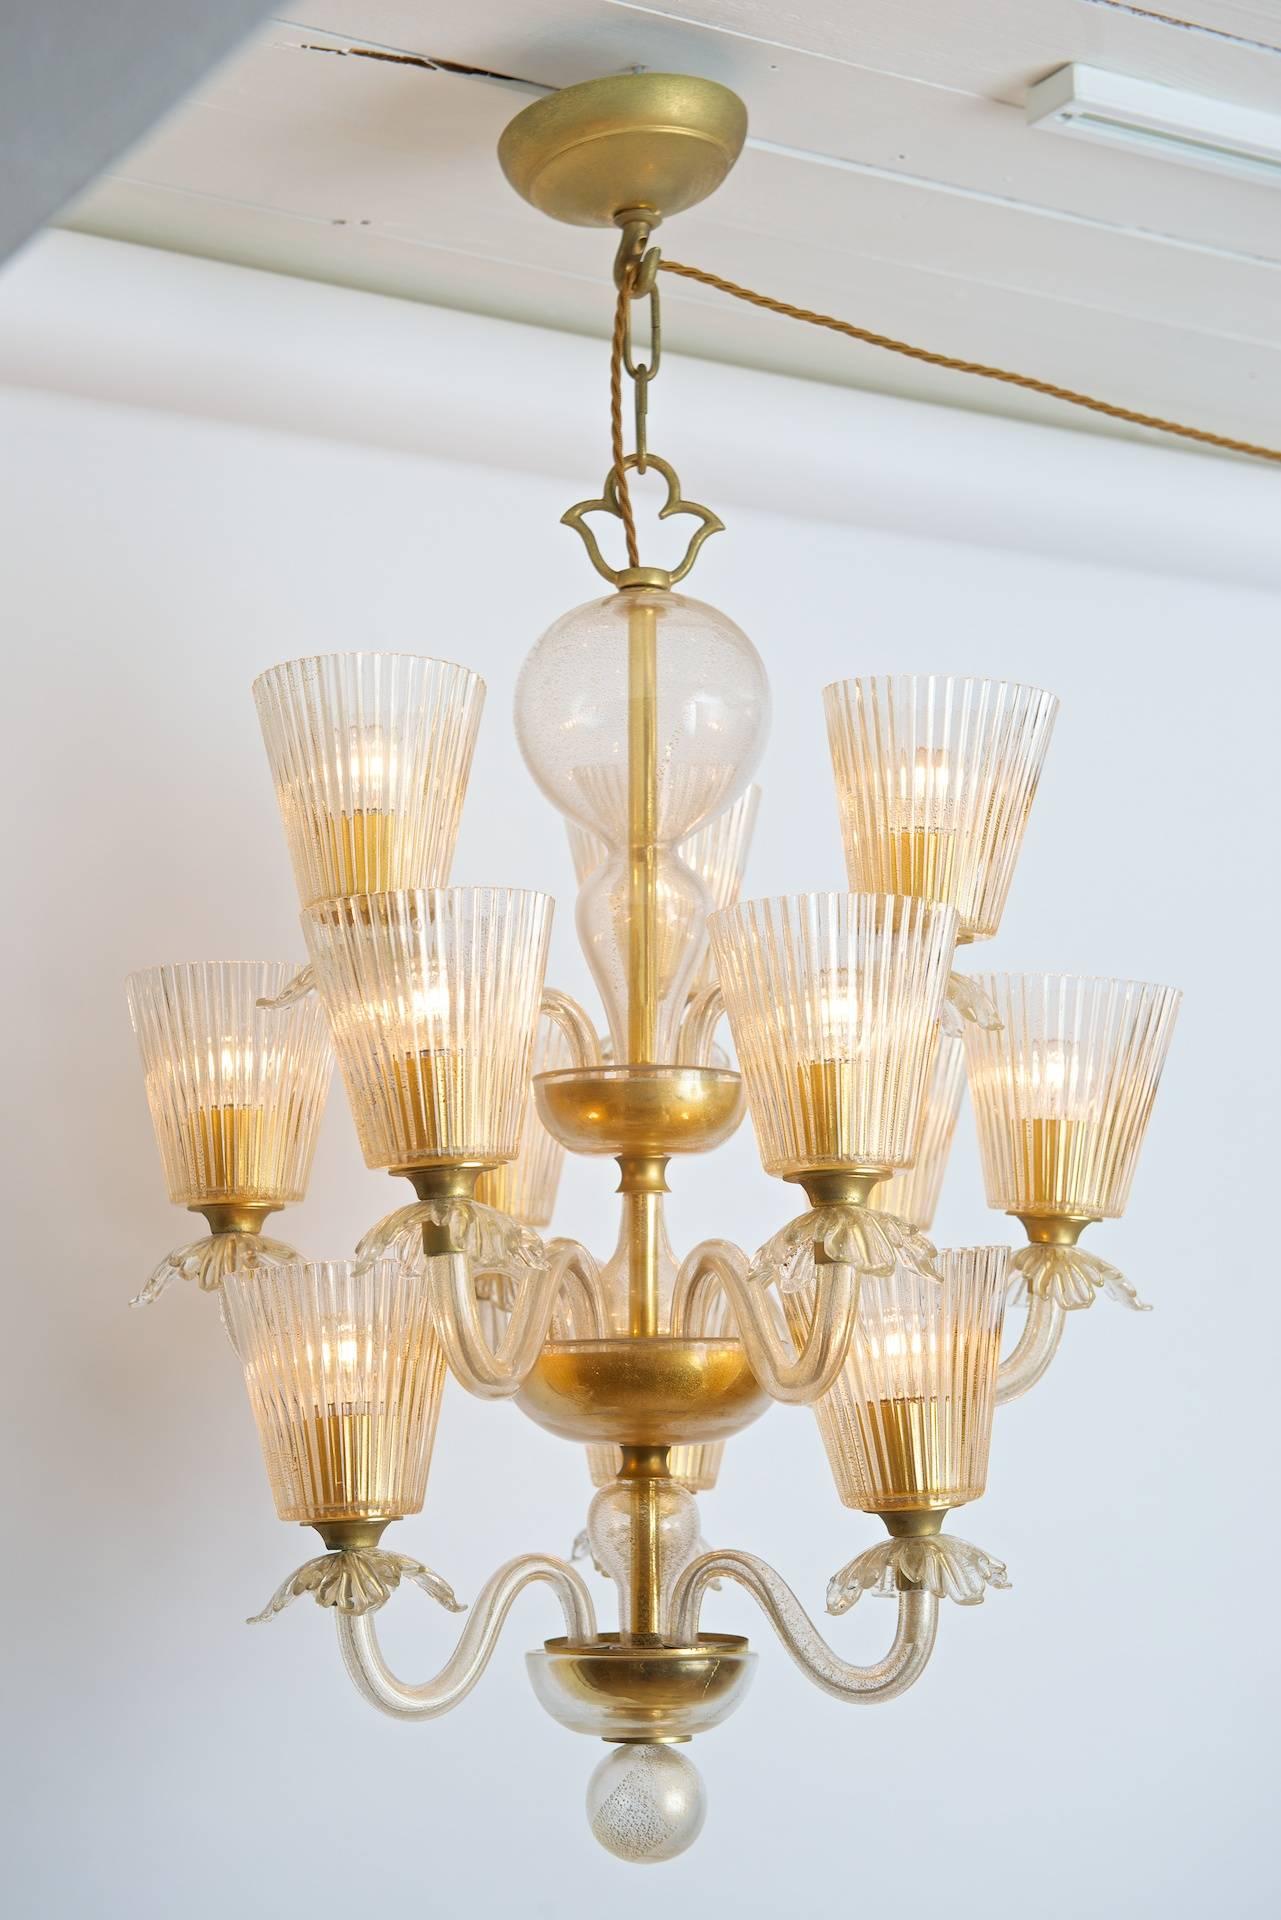 Exquisite and excellent quality chandelier by Barovier

Blown Murano glass with gold inclusions.

Italy, circa 1949

Re wired.